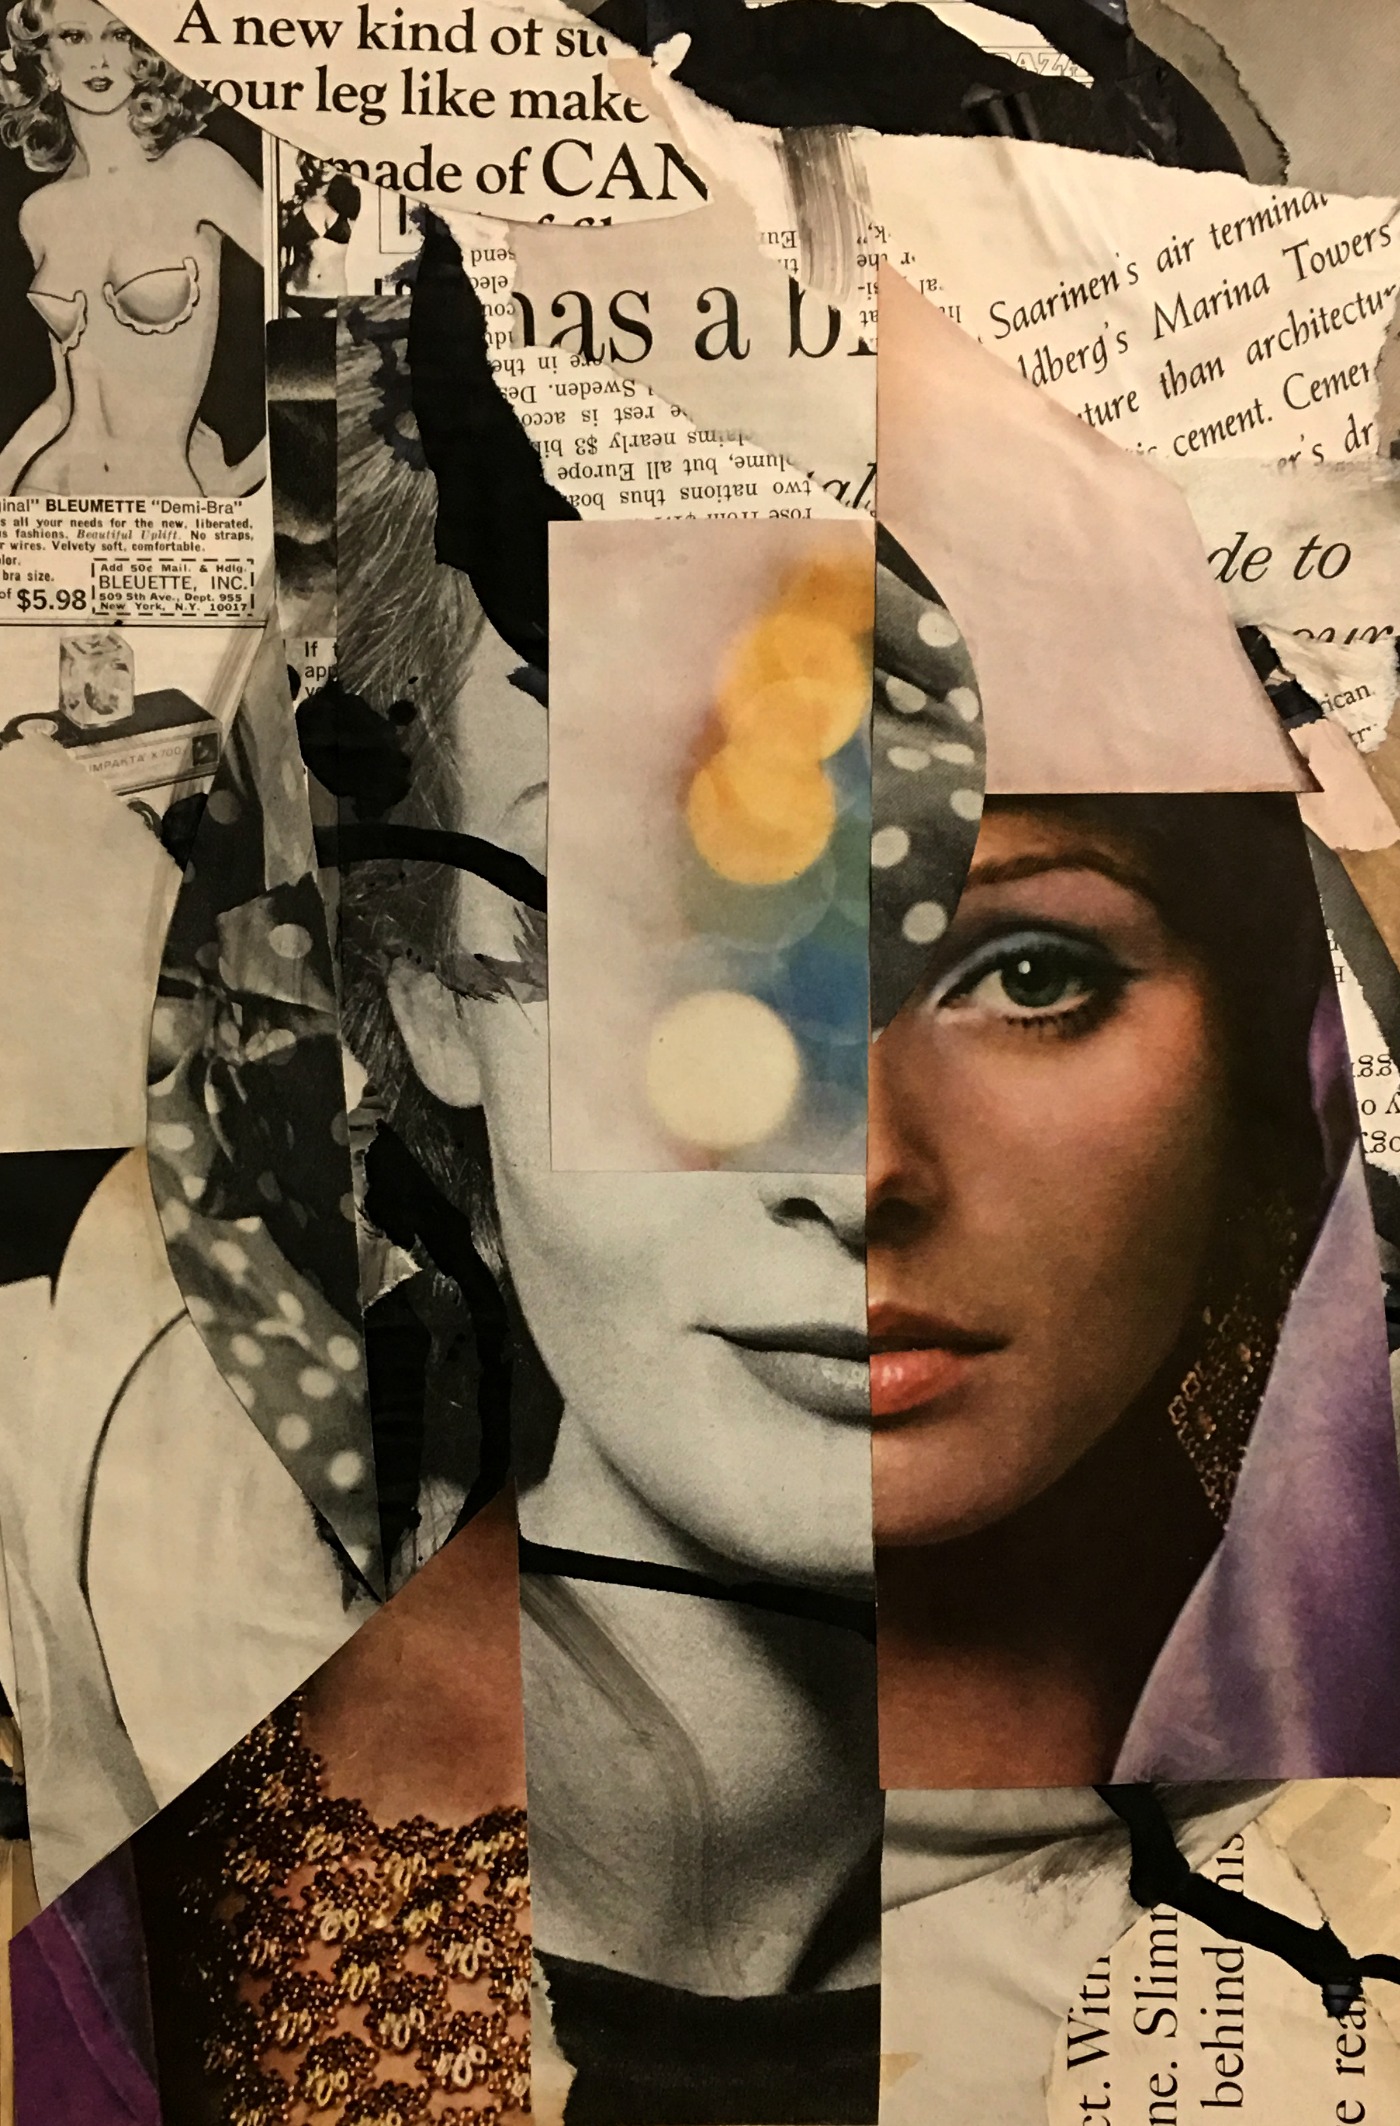 2017-2019-mixed-media-collage-portraits-russell-c-smith-mixed-media